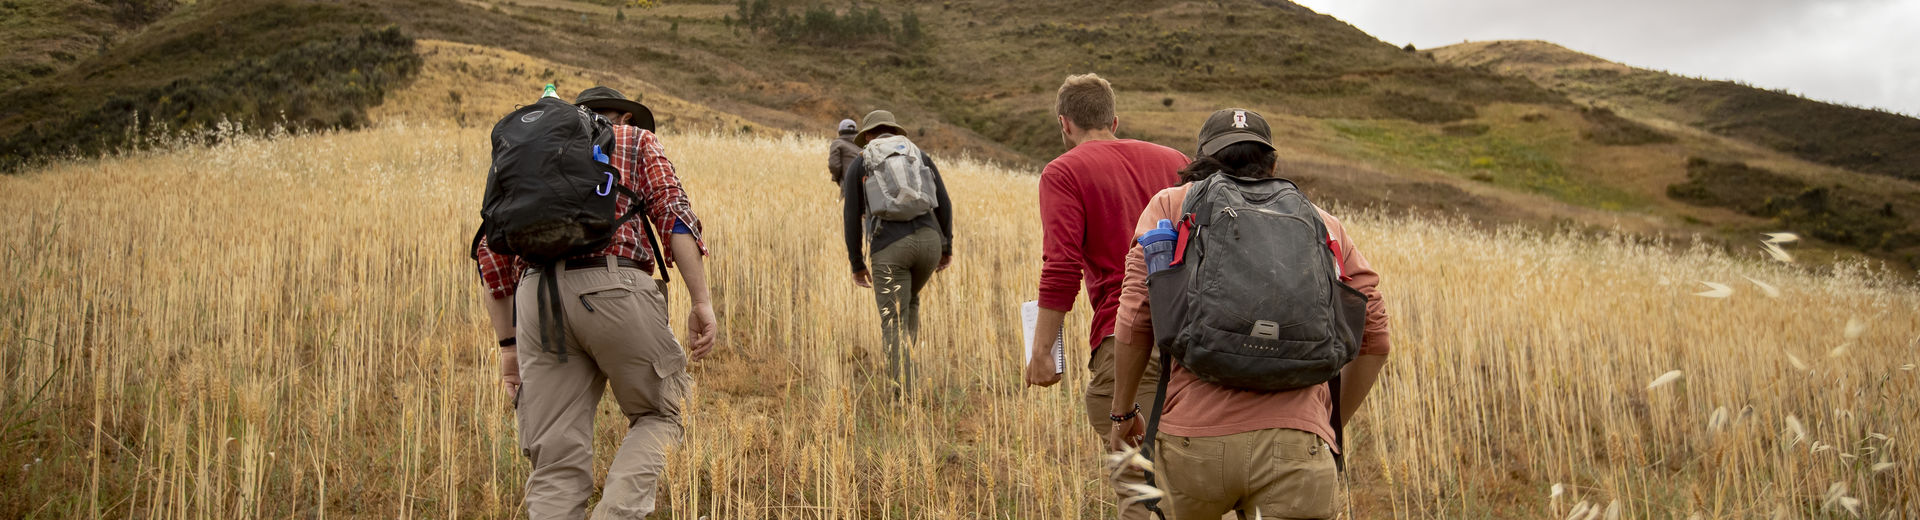 College of Liberal Arts students hiking in Latin America